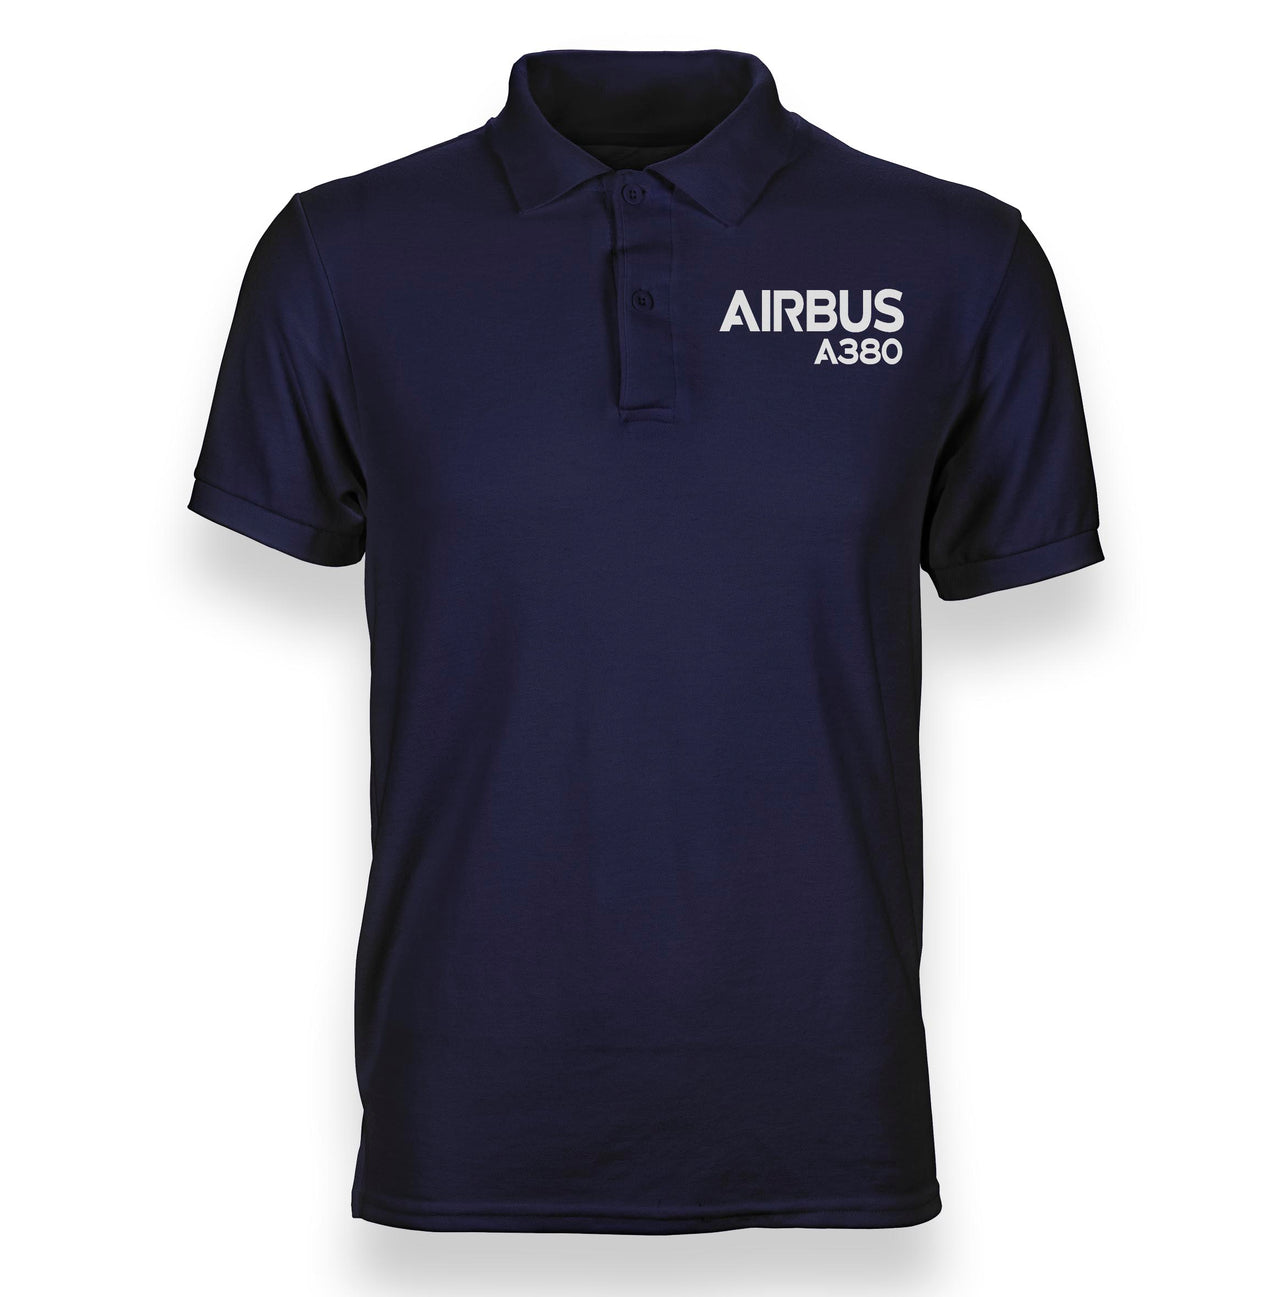 Airbus A380 & Text Designed Polo T-Shirts